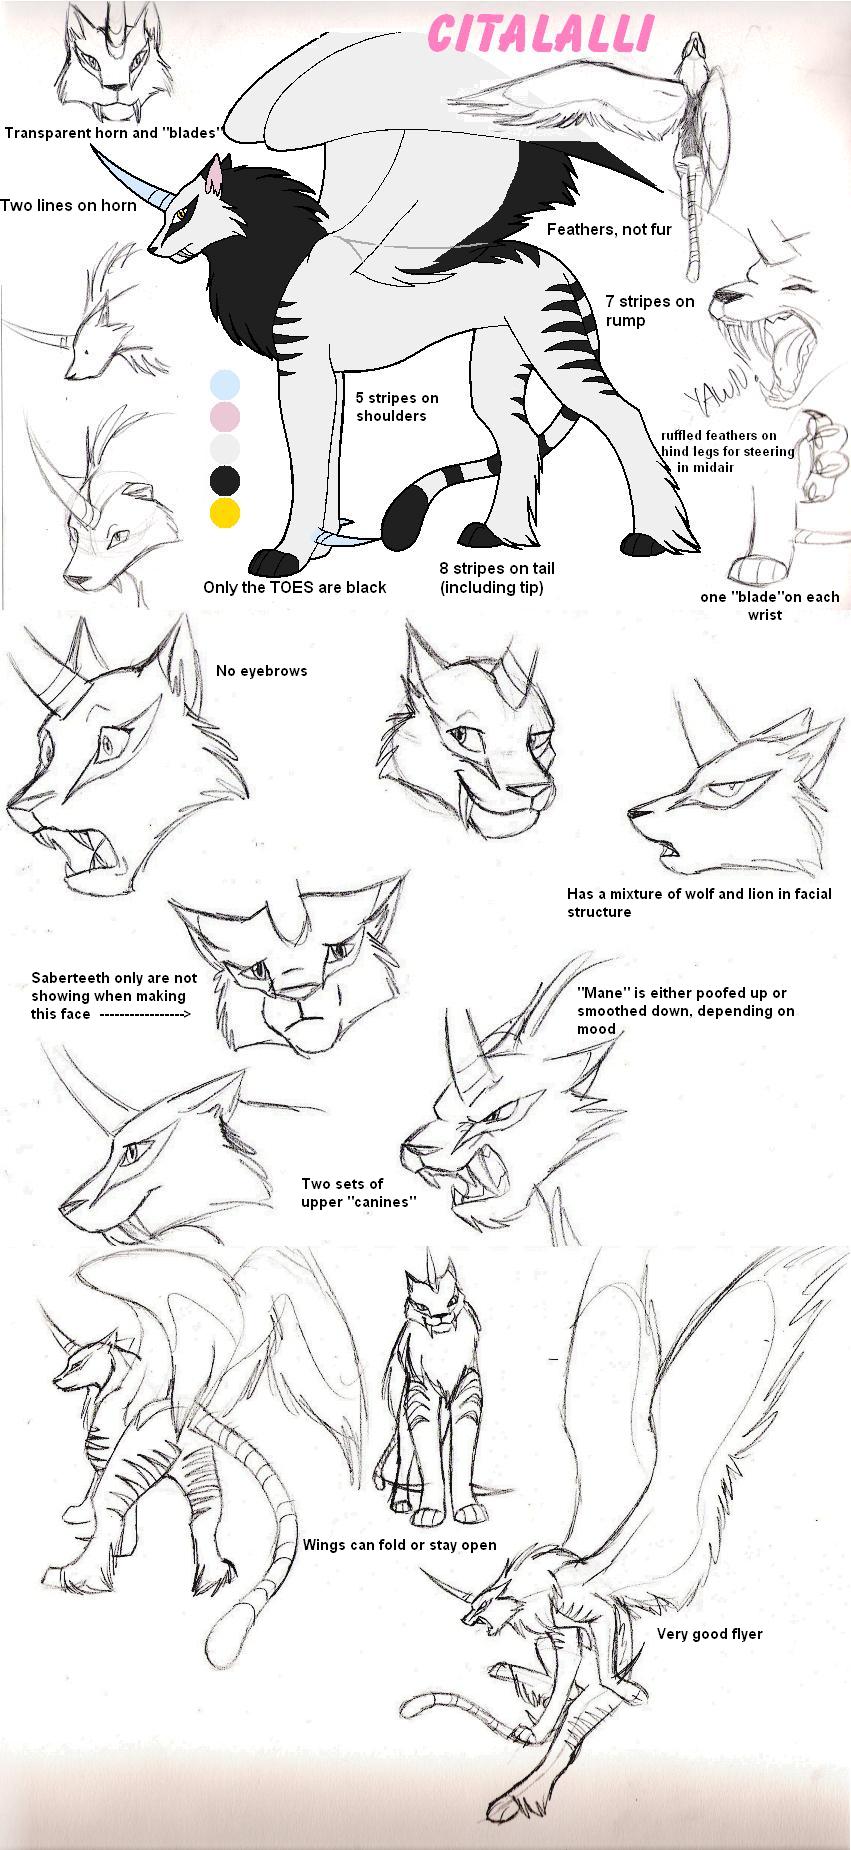 Cita reference sheets by CatWhoHas14Tails